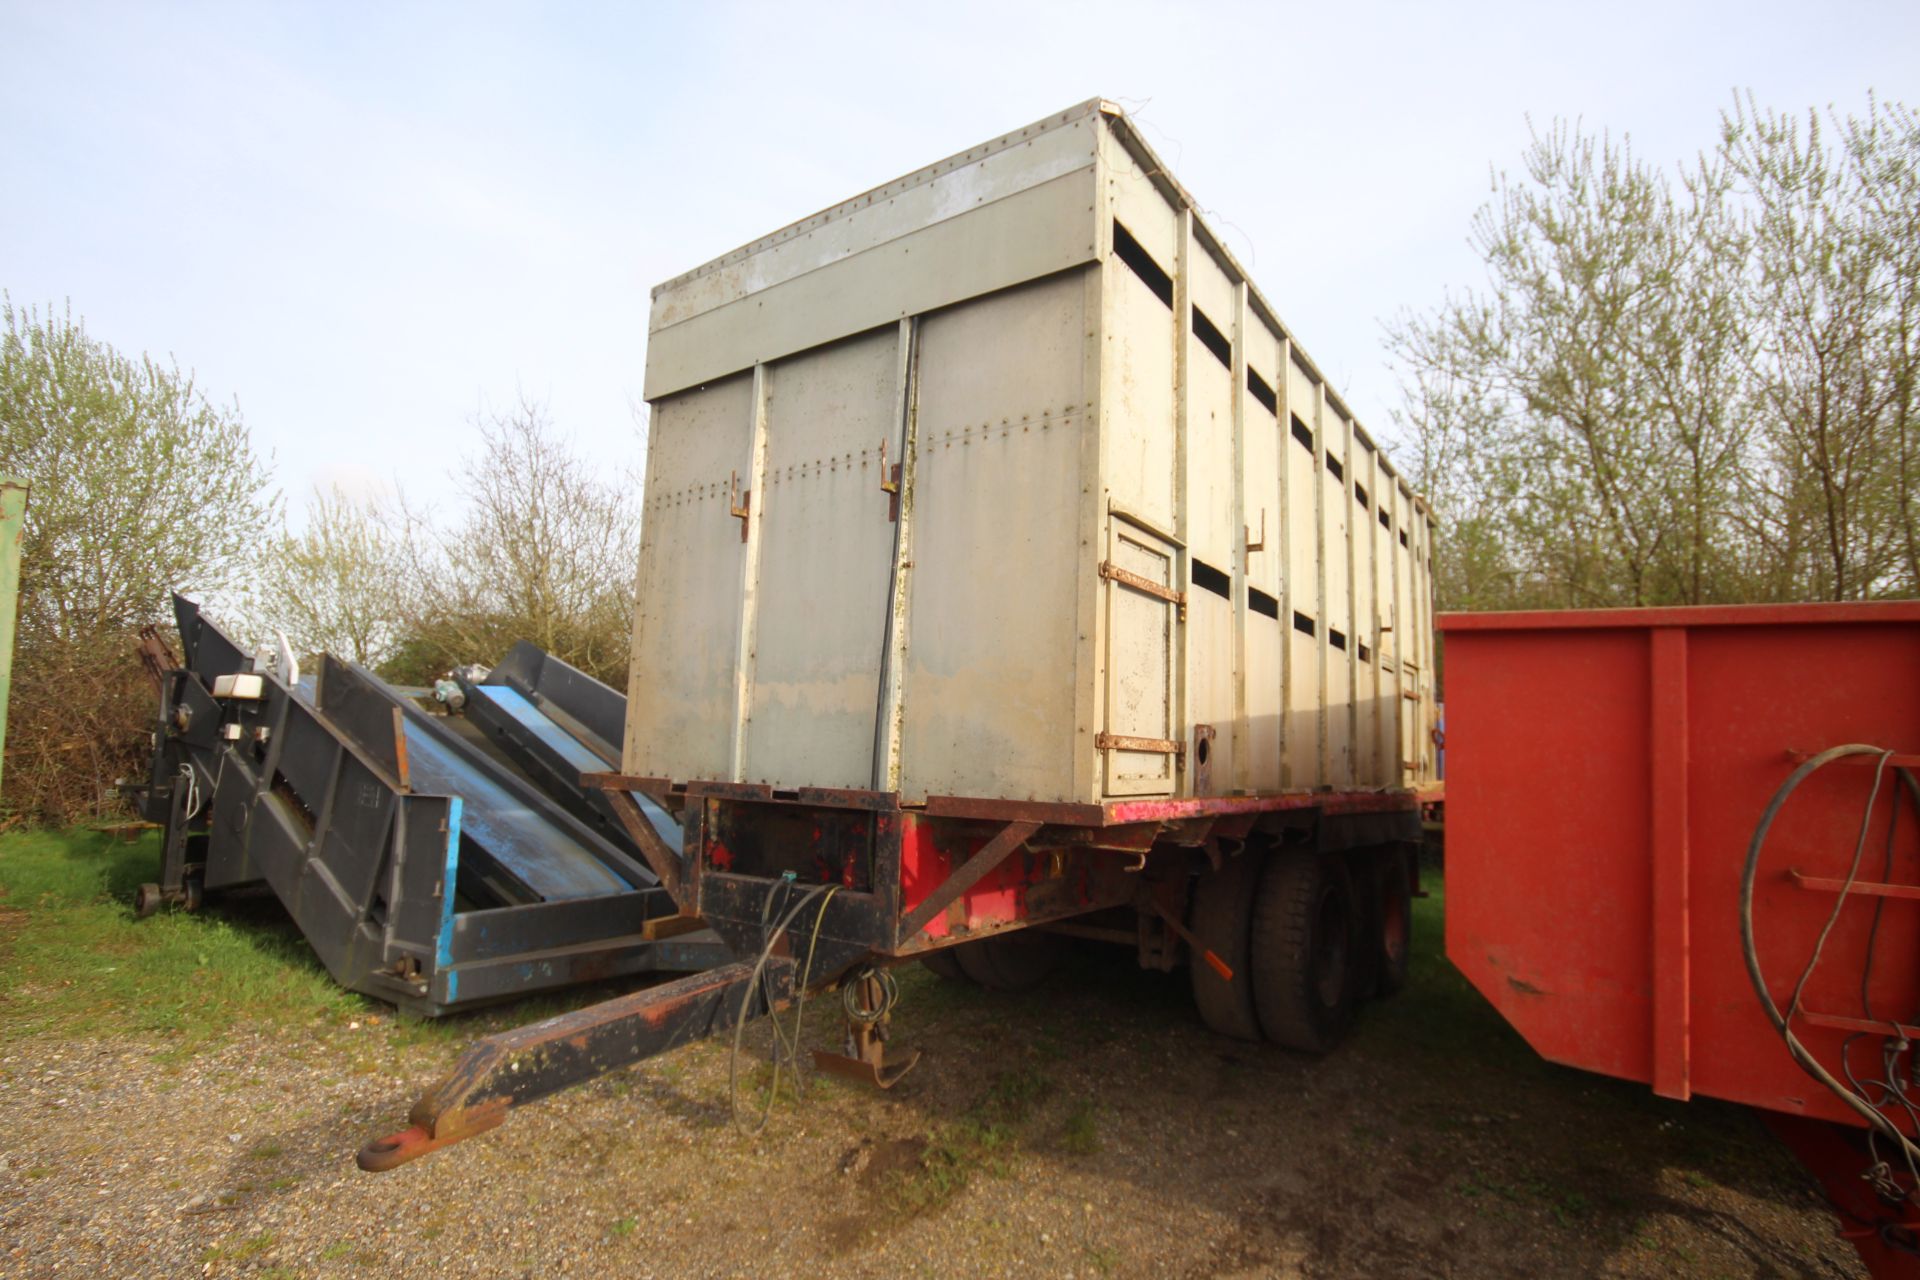 19ft 6in twin axle tractor drawn livestock trailer. Ex-lorry drag. With steel suspension and twin